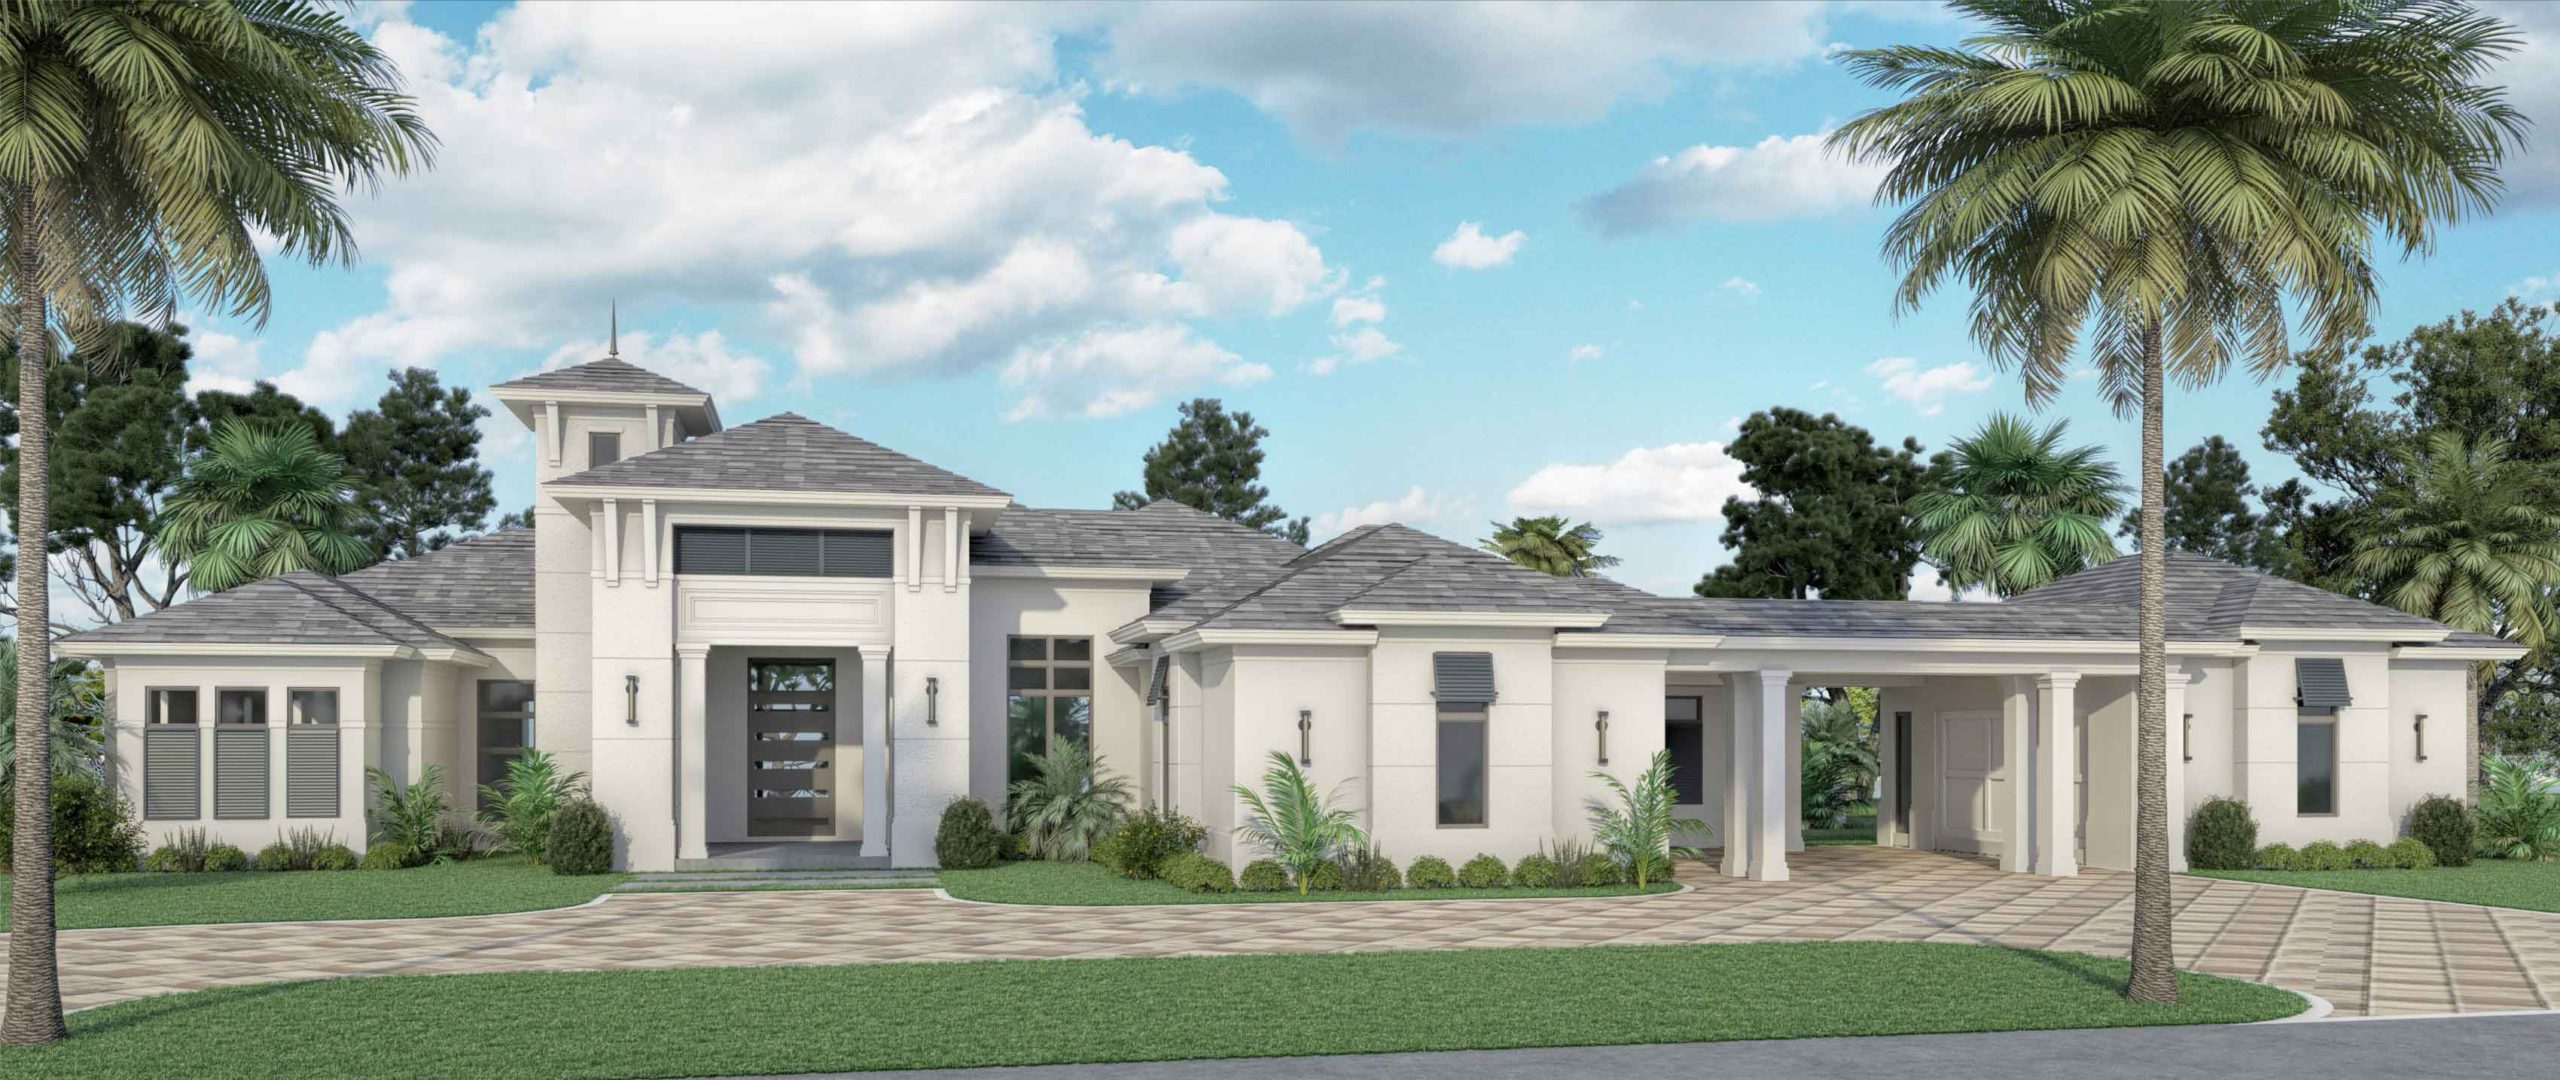 Domenica residence front elevation rendering by Diamond Custom Homes